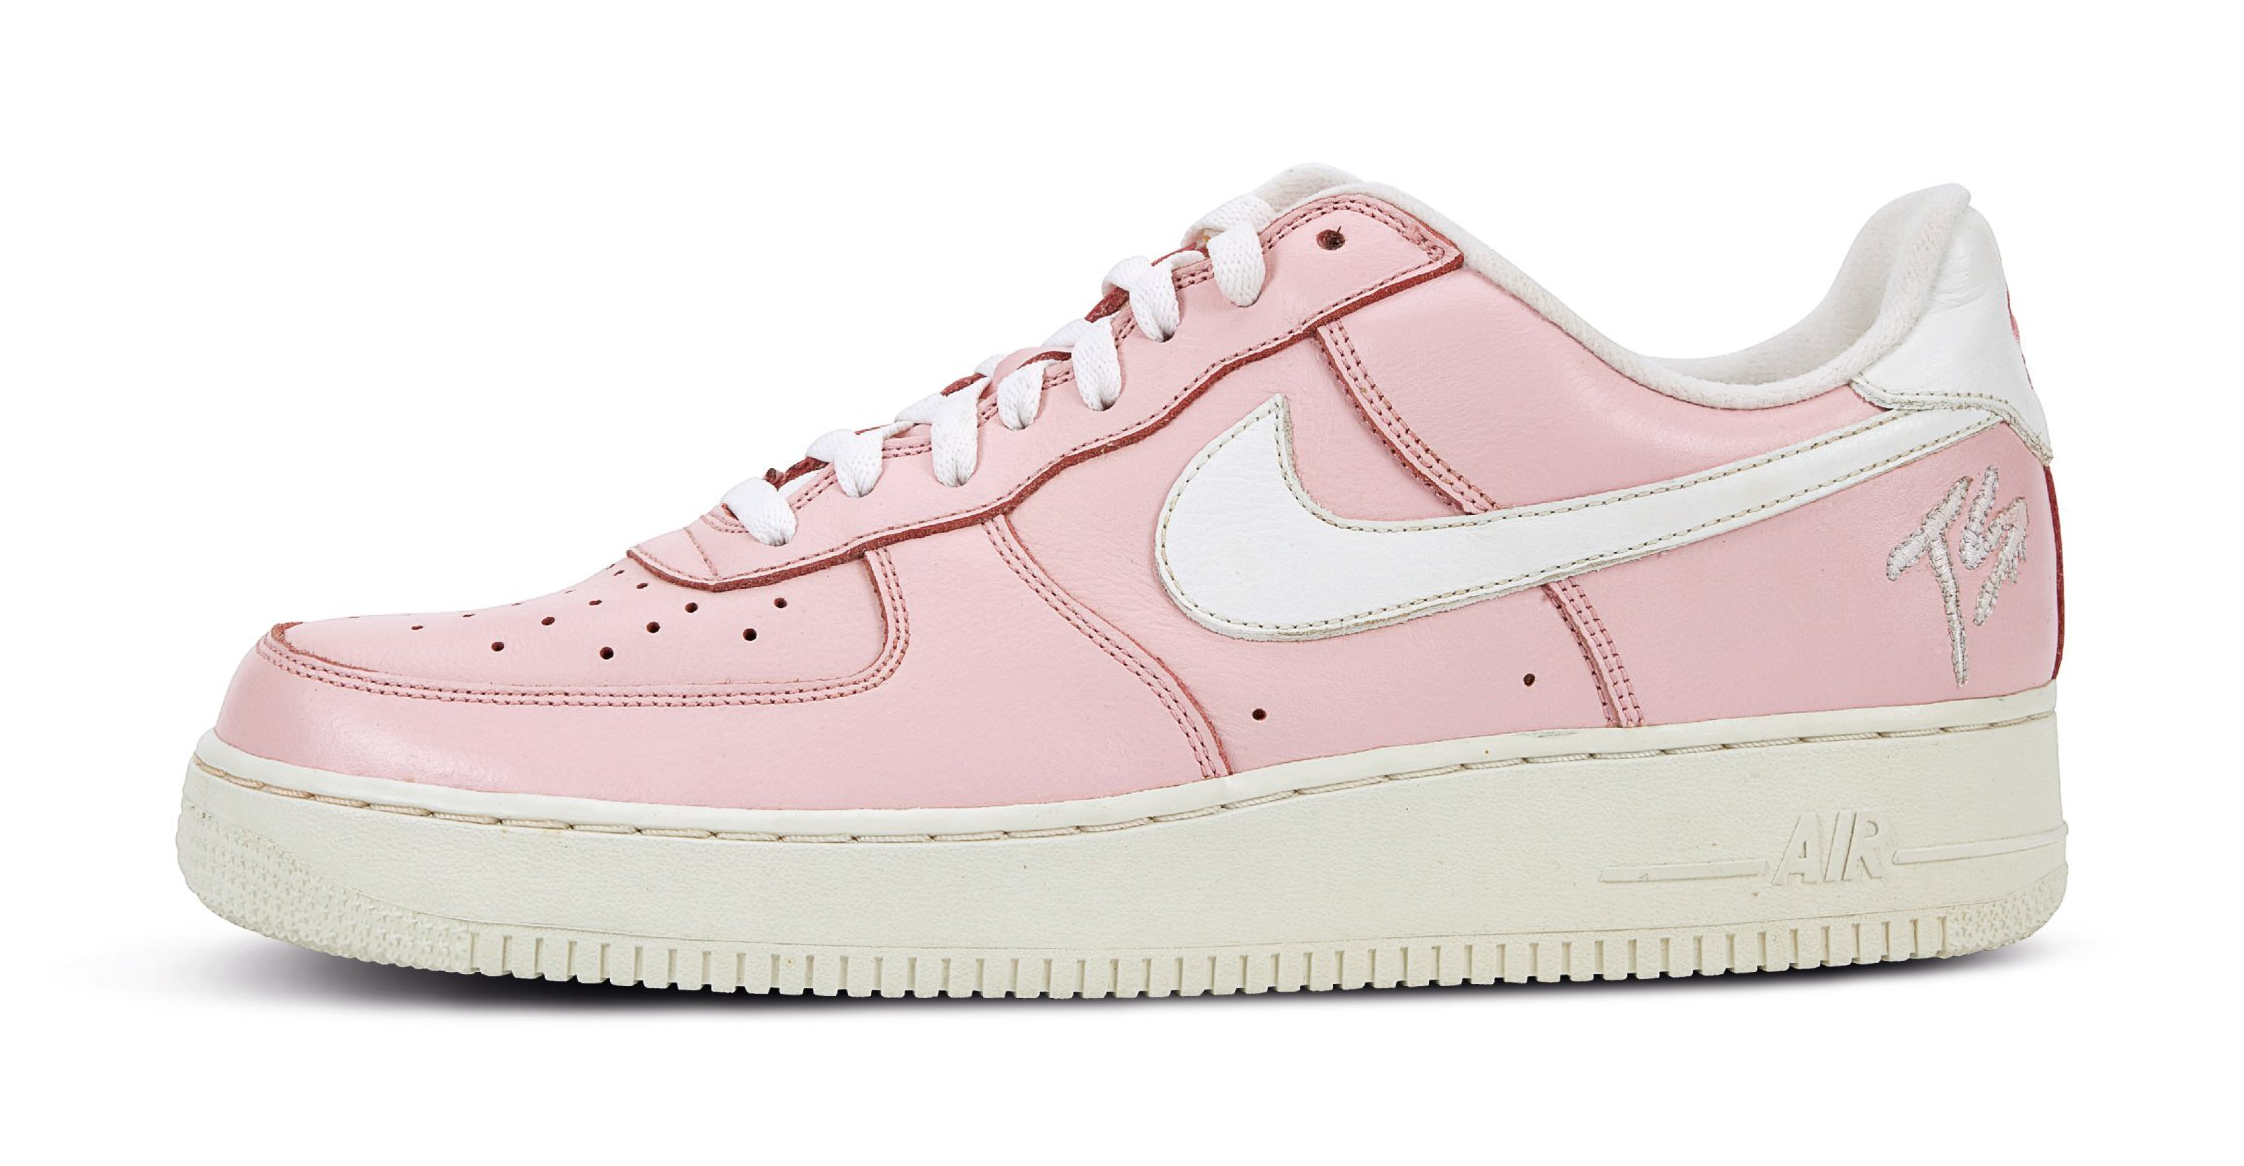 Pink Terror Squad Nike Air Force 1s from 2004